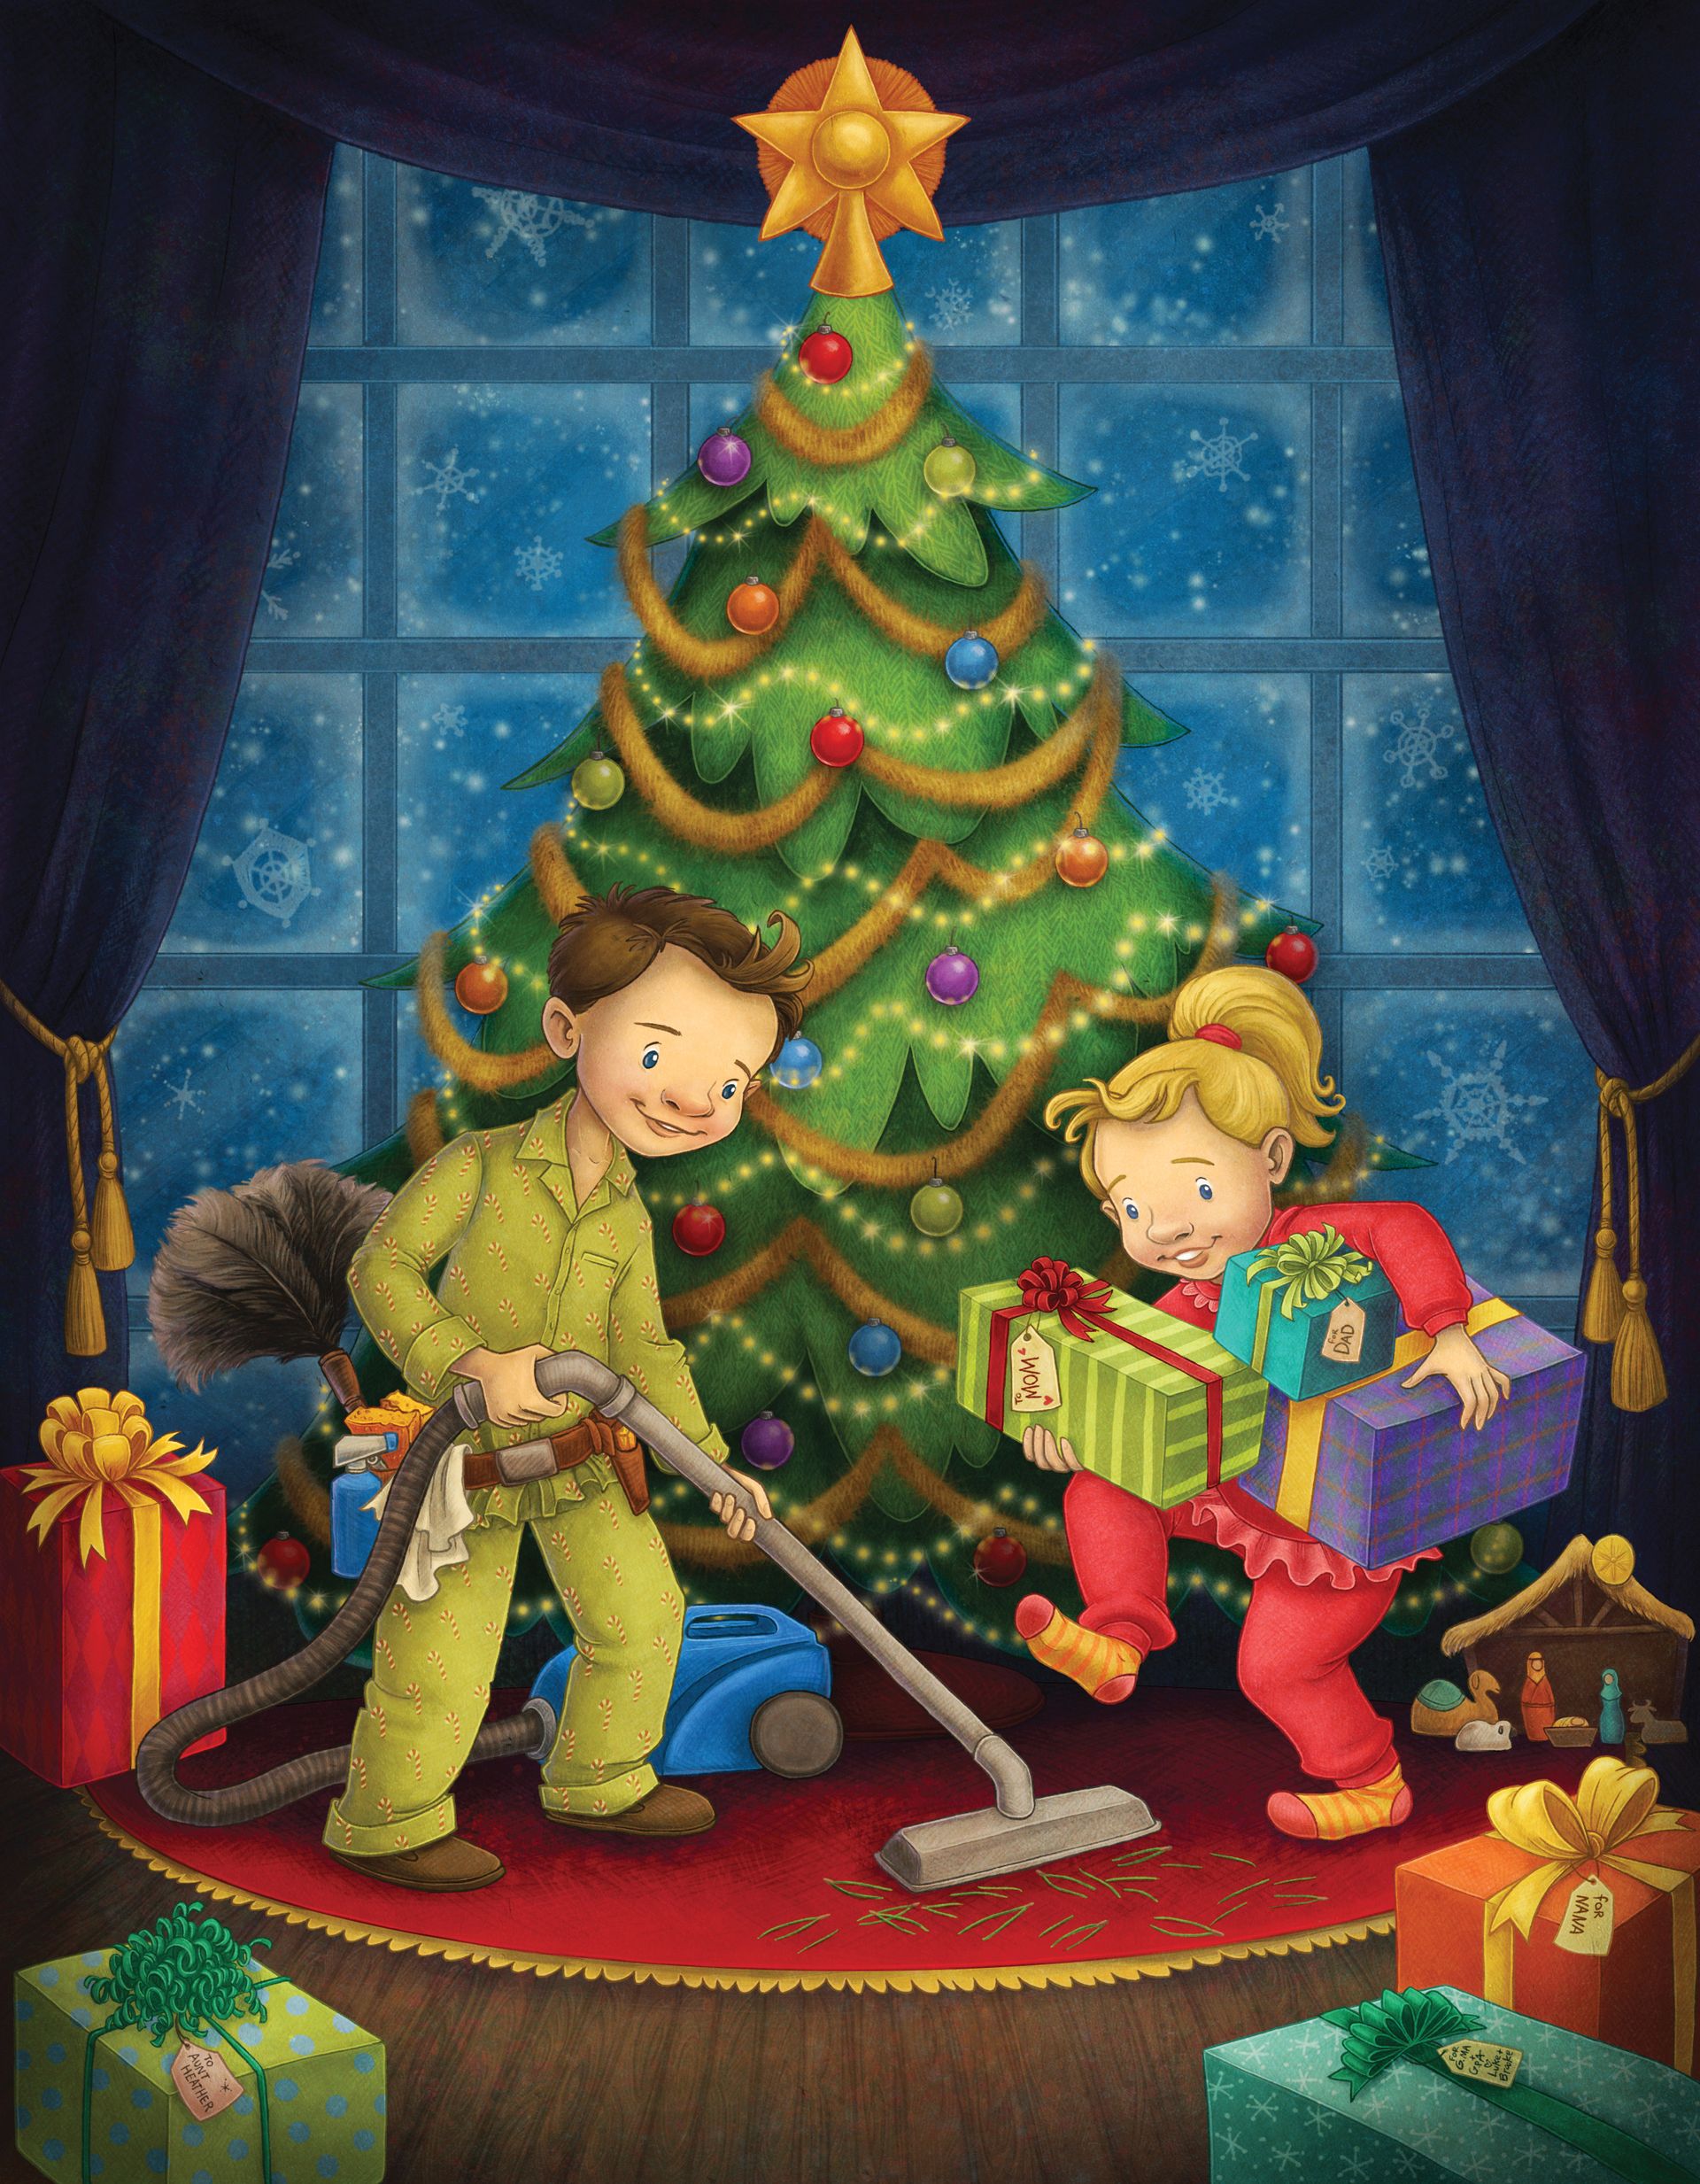 A boy and a girl get ready for Christmas and clean up around a Christmas tree.